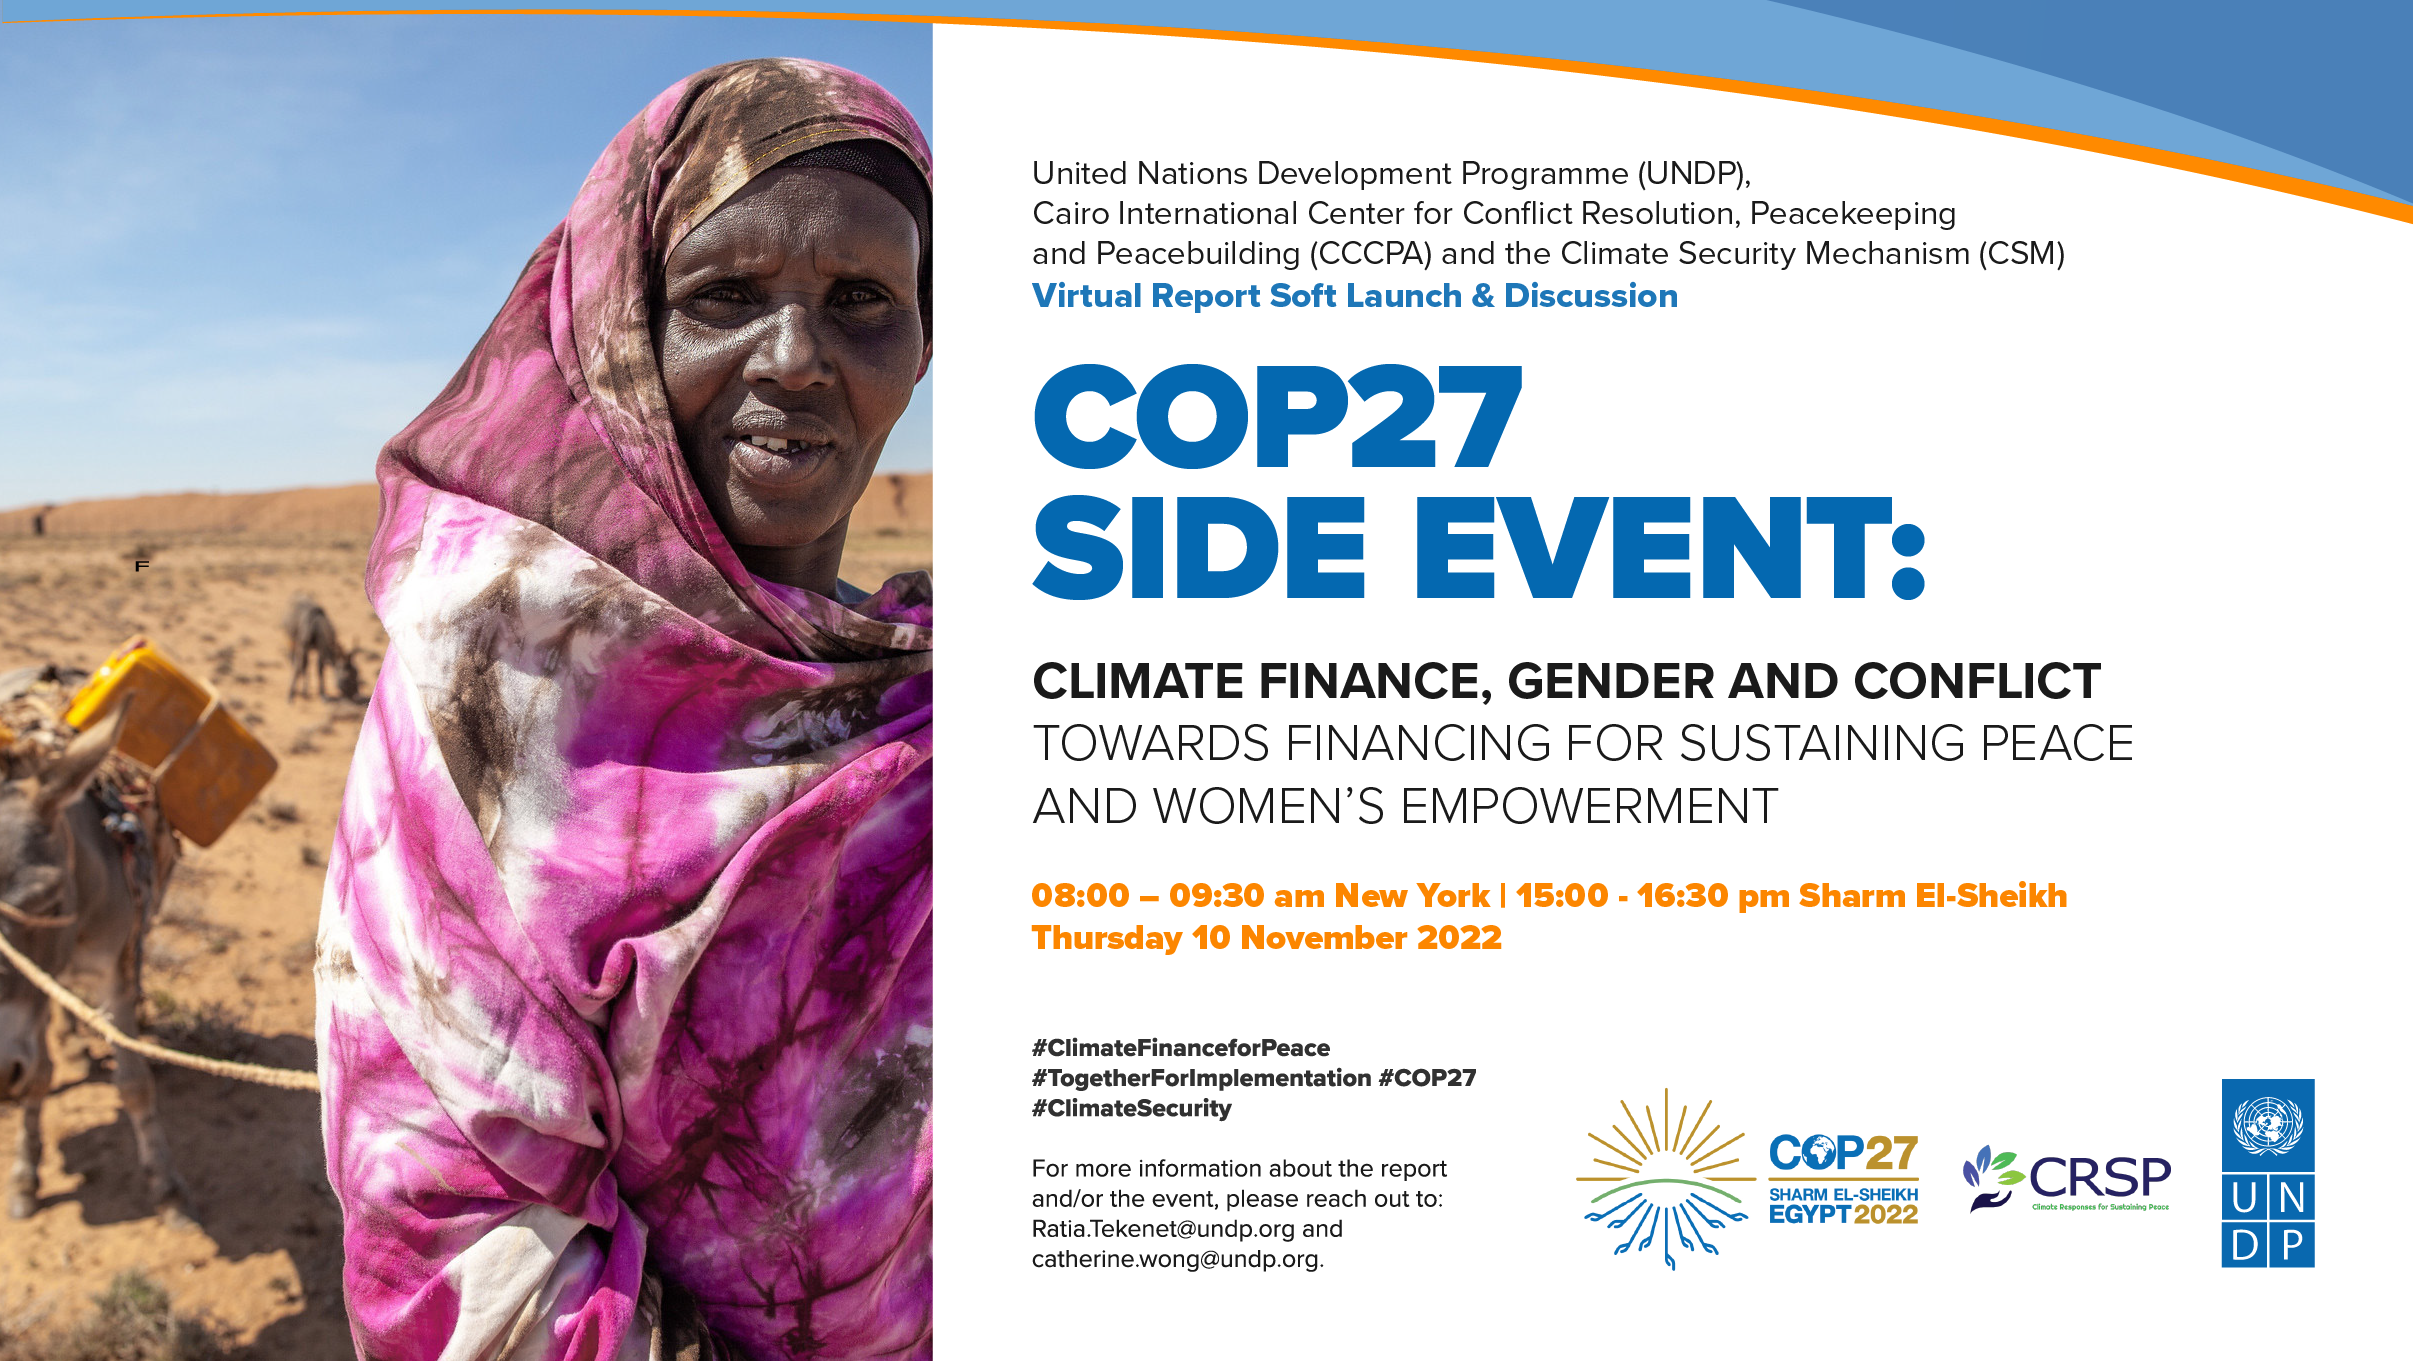 Flyer for the COP27 Side Event on Climate Finance, Gender and Conflict